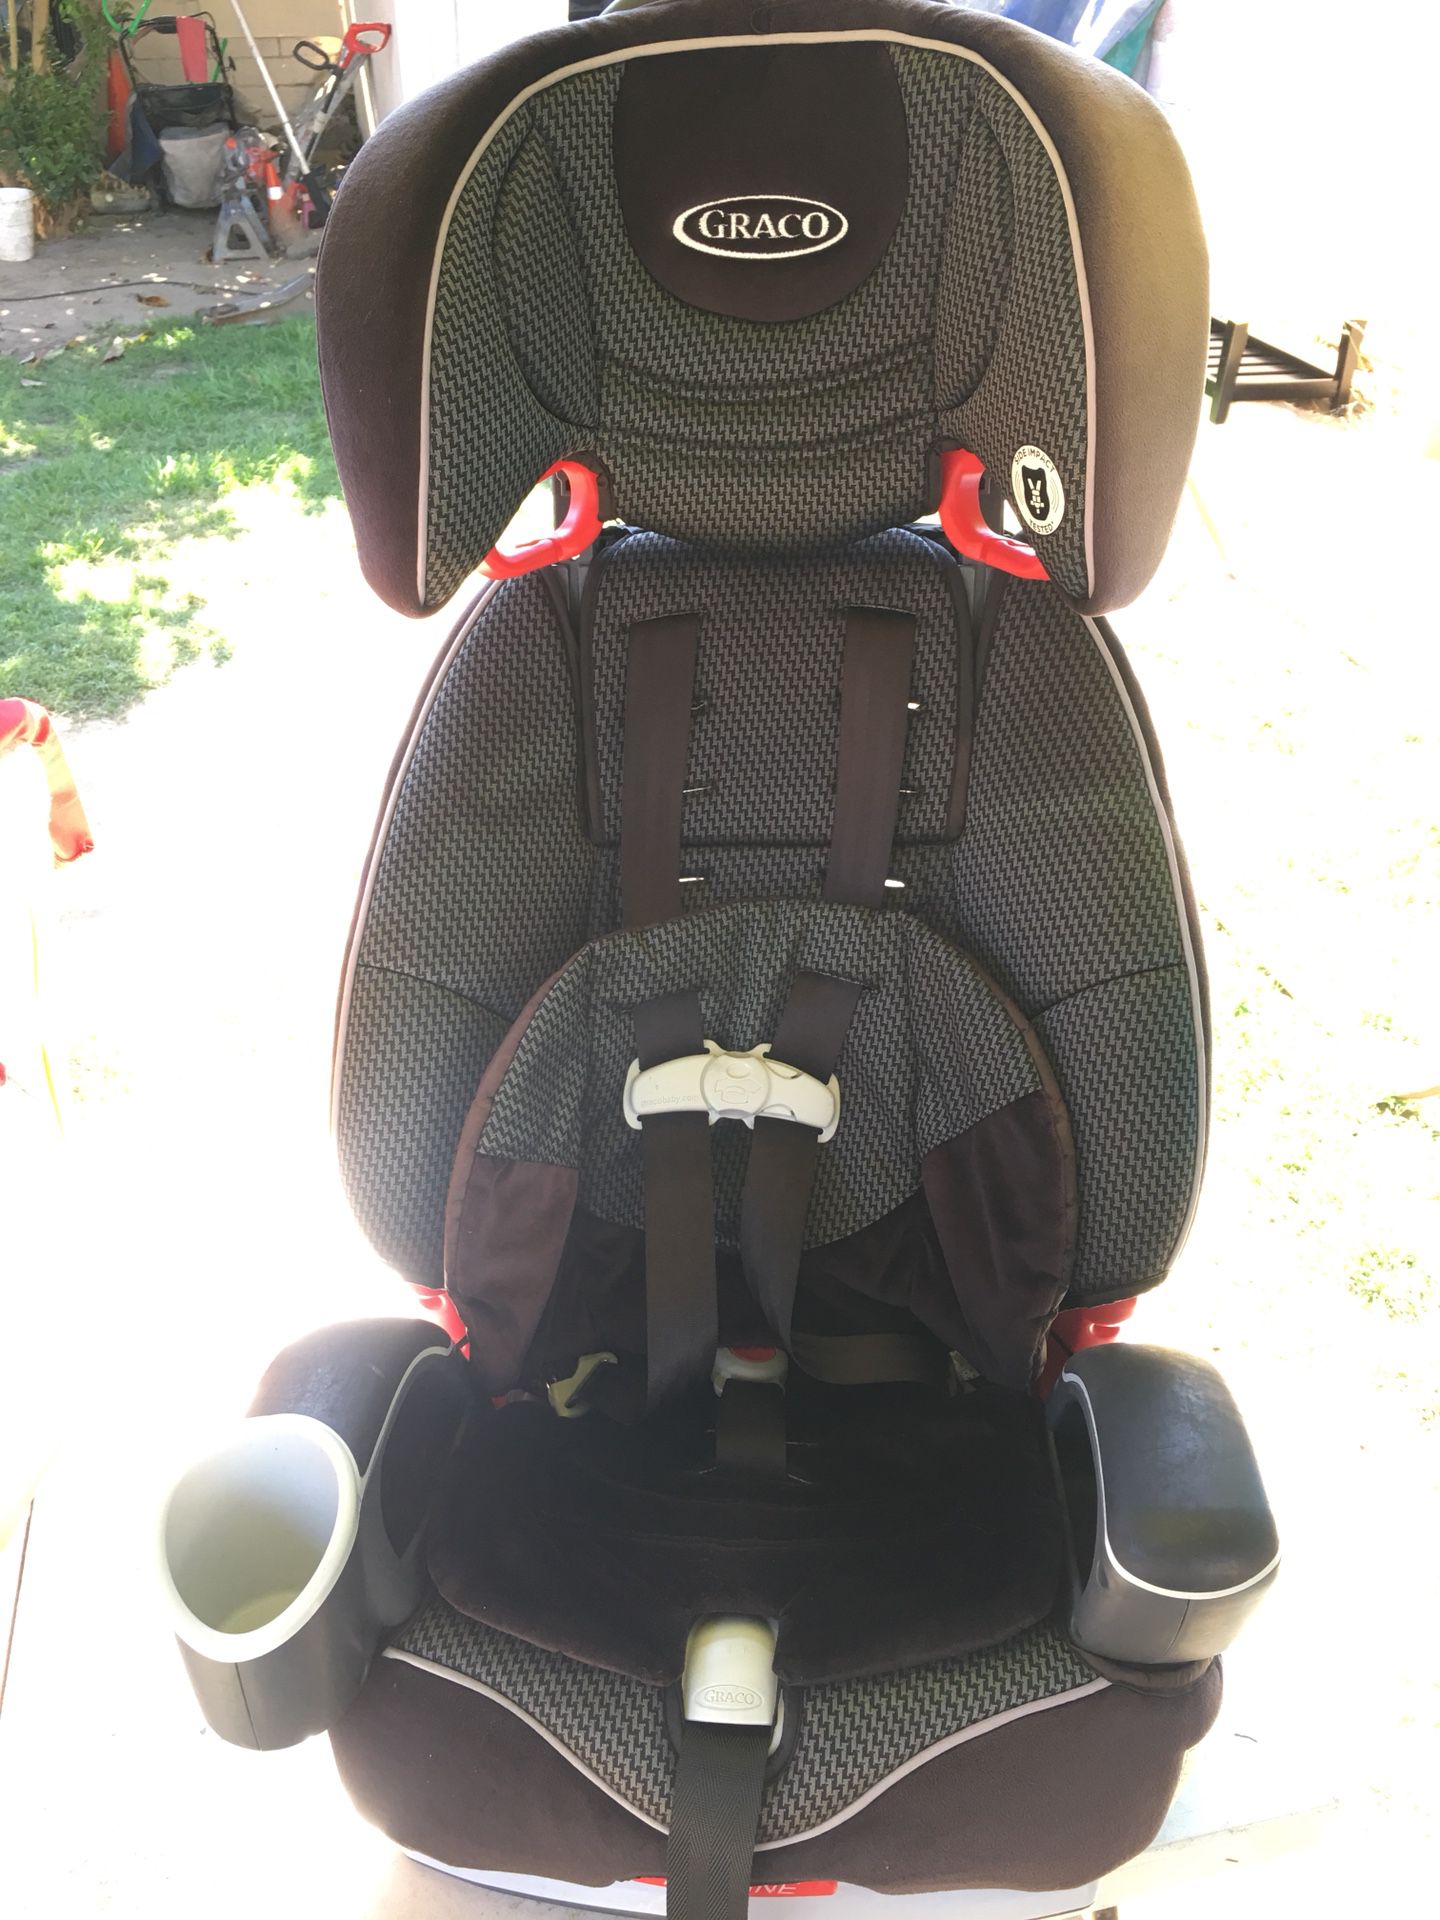 Graco baby car seat ,used but good condition